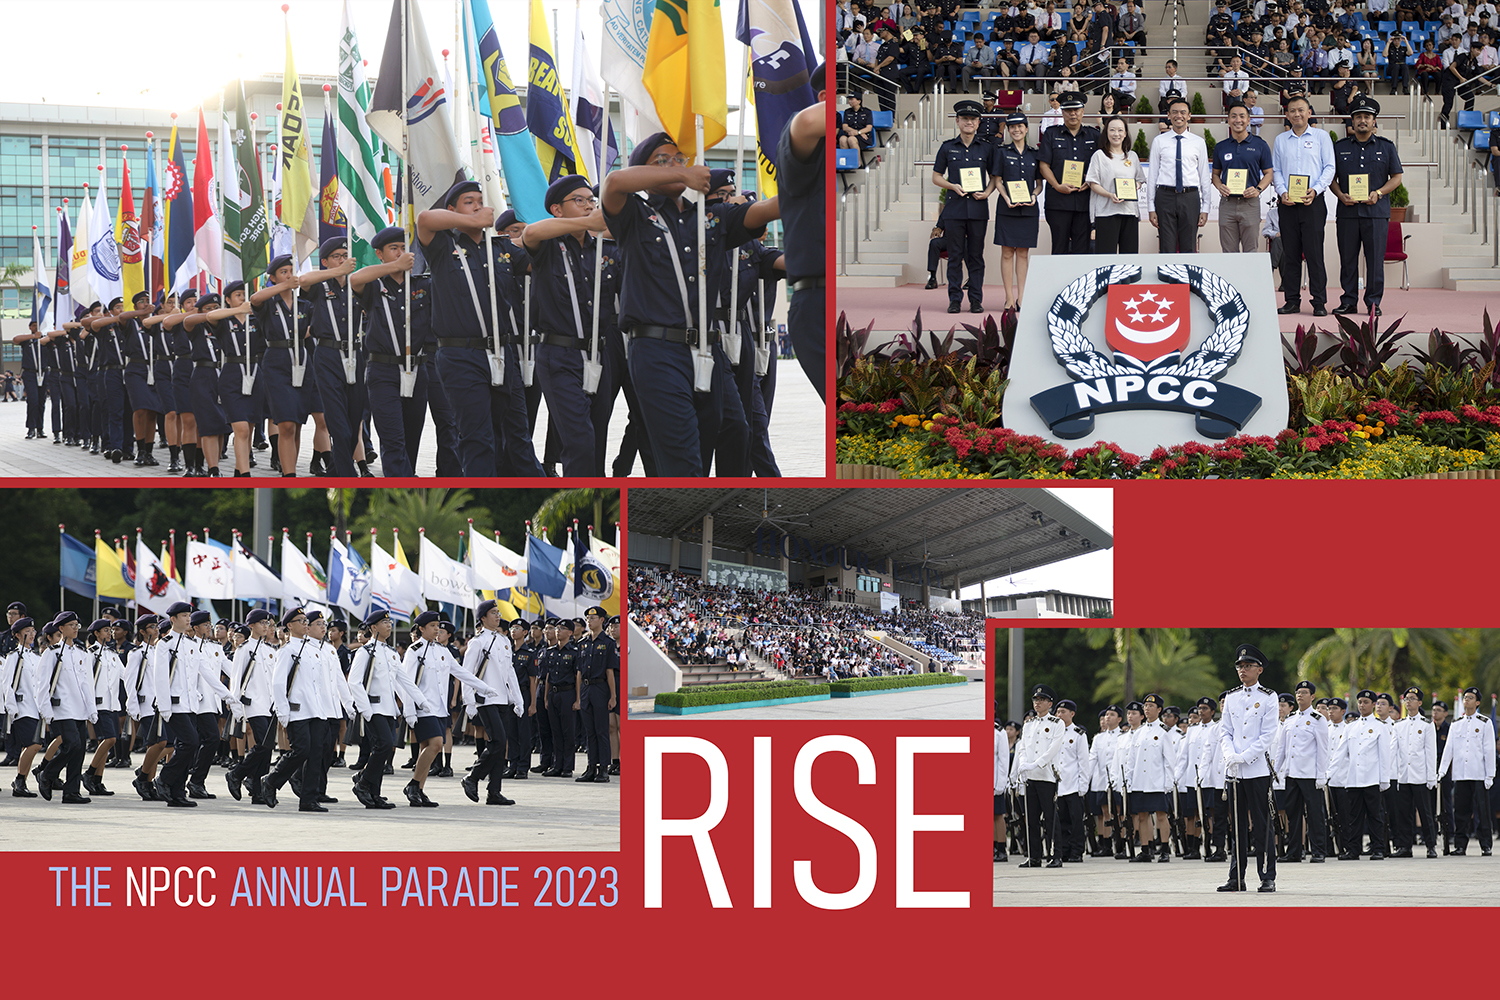 Police Life 052023 RISE The NPCC Annual Parade 01 